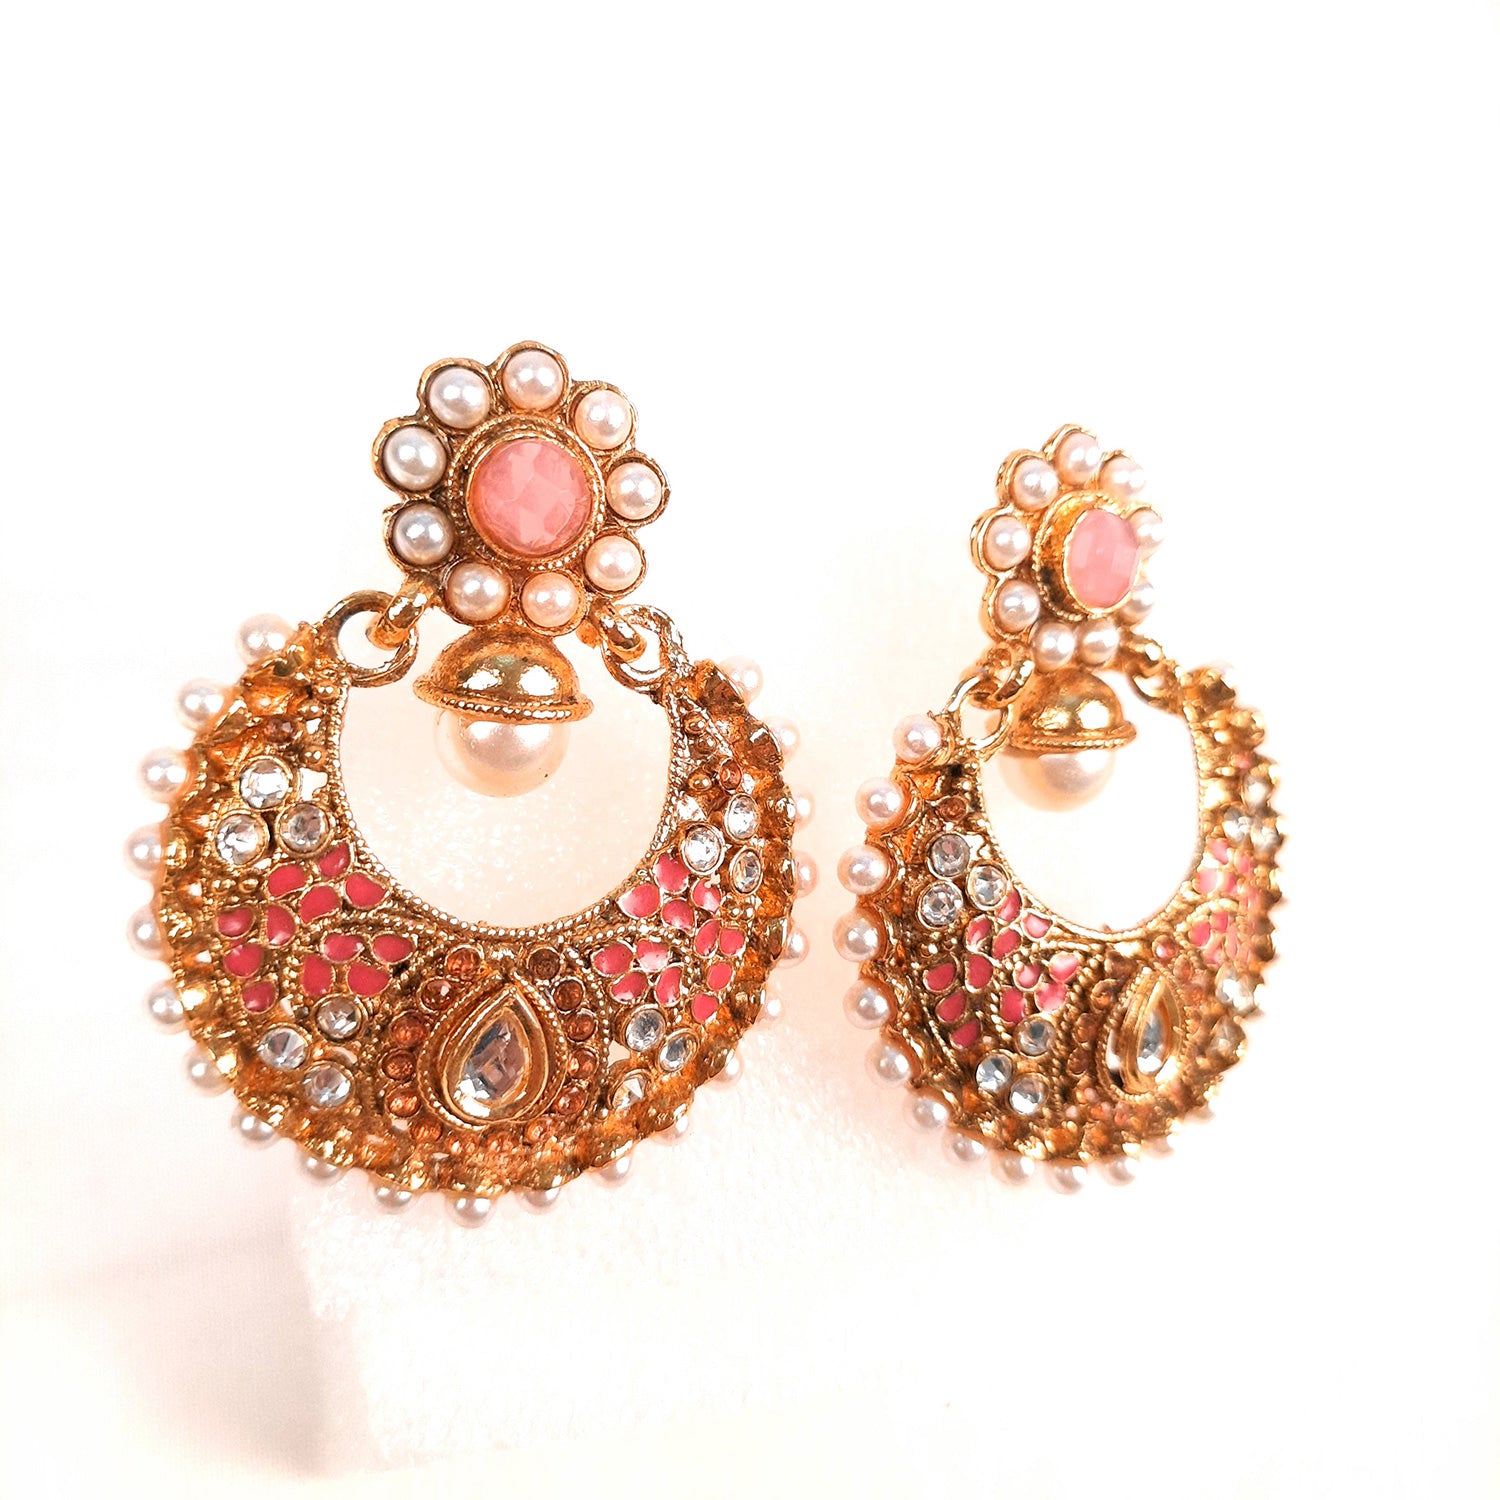 Earrings for Women & Girls | Chand Bali Earring - Traditional Jewelry | Stylish Fashion Jewellery | Gift for Her, Friendship Day, Valentine's Day Gift - Apkamart